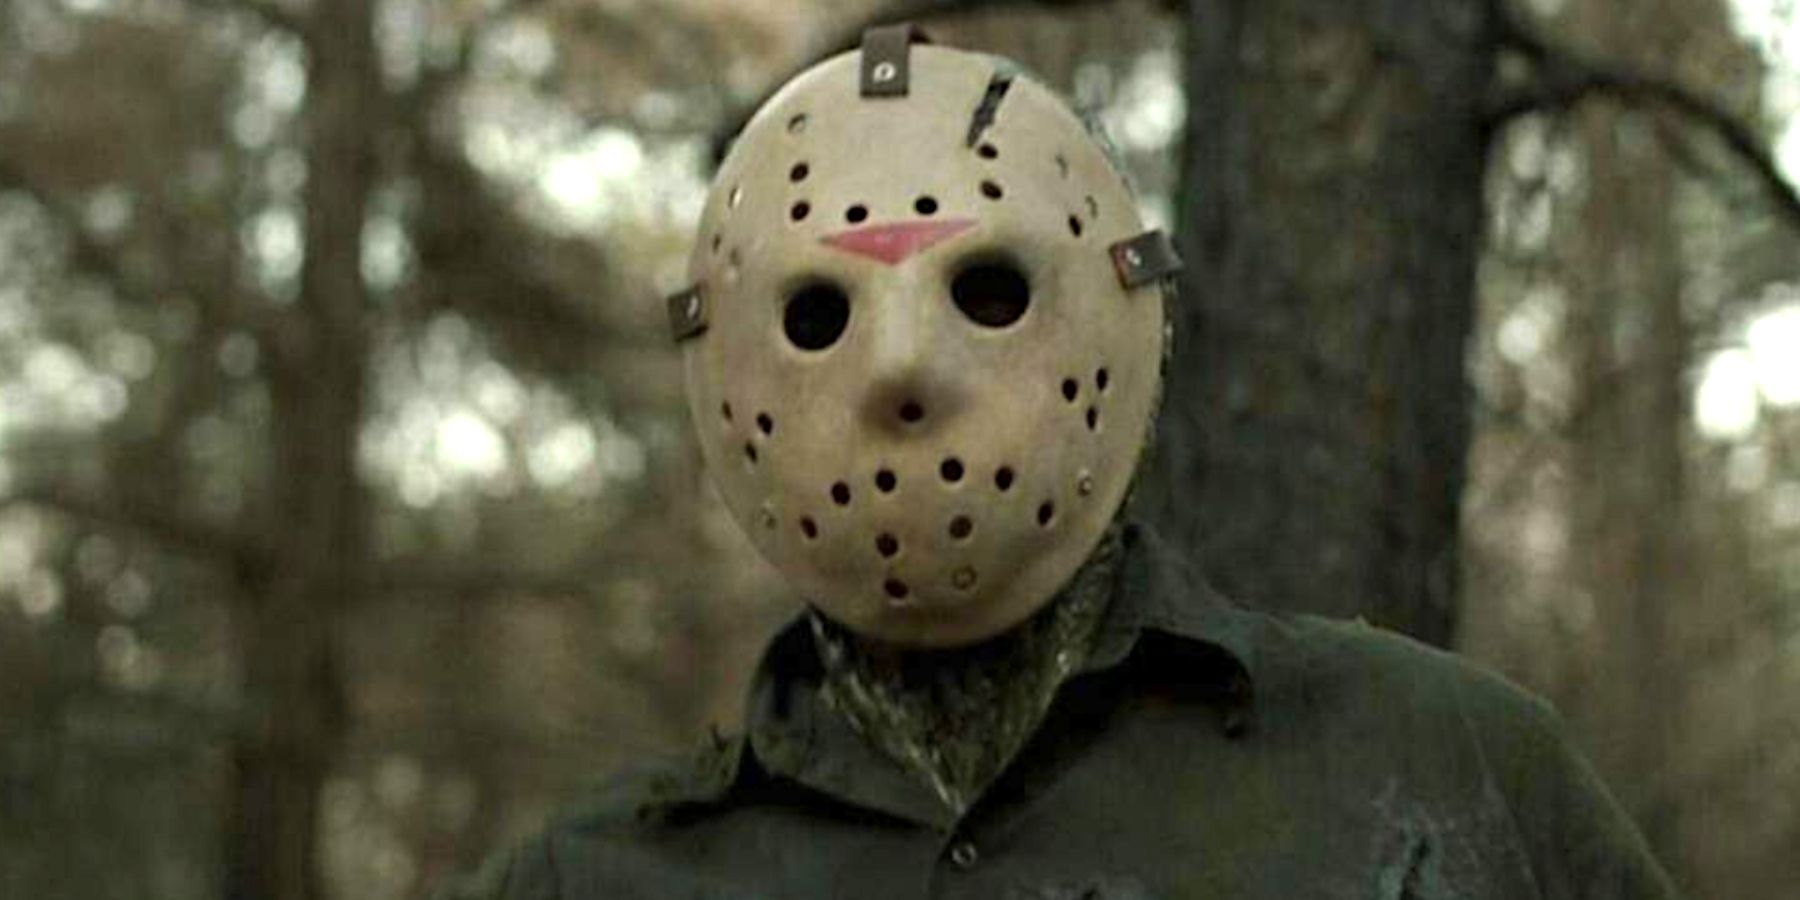 Jason Voorhees in his Friday The 13th mask